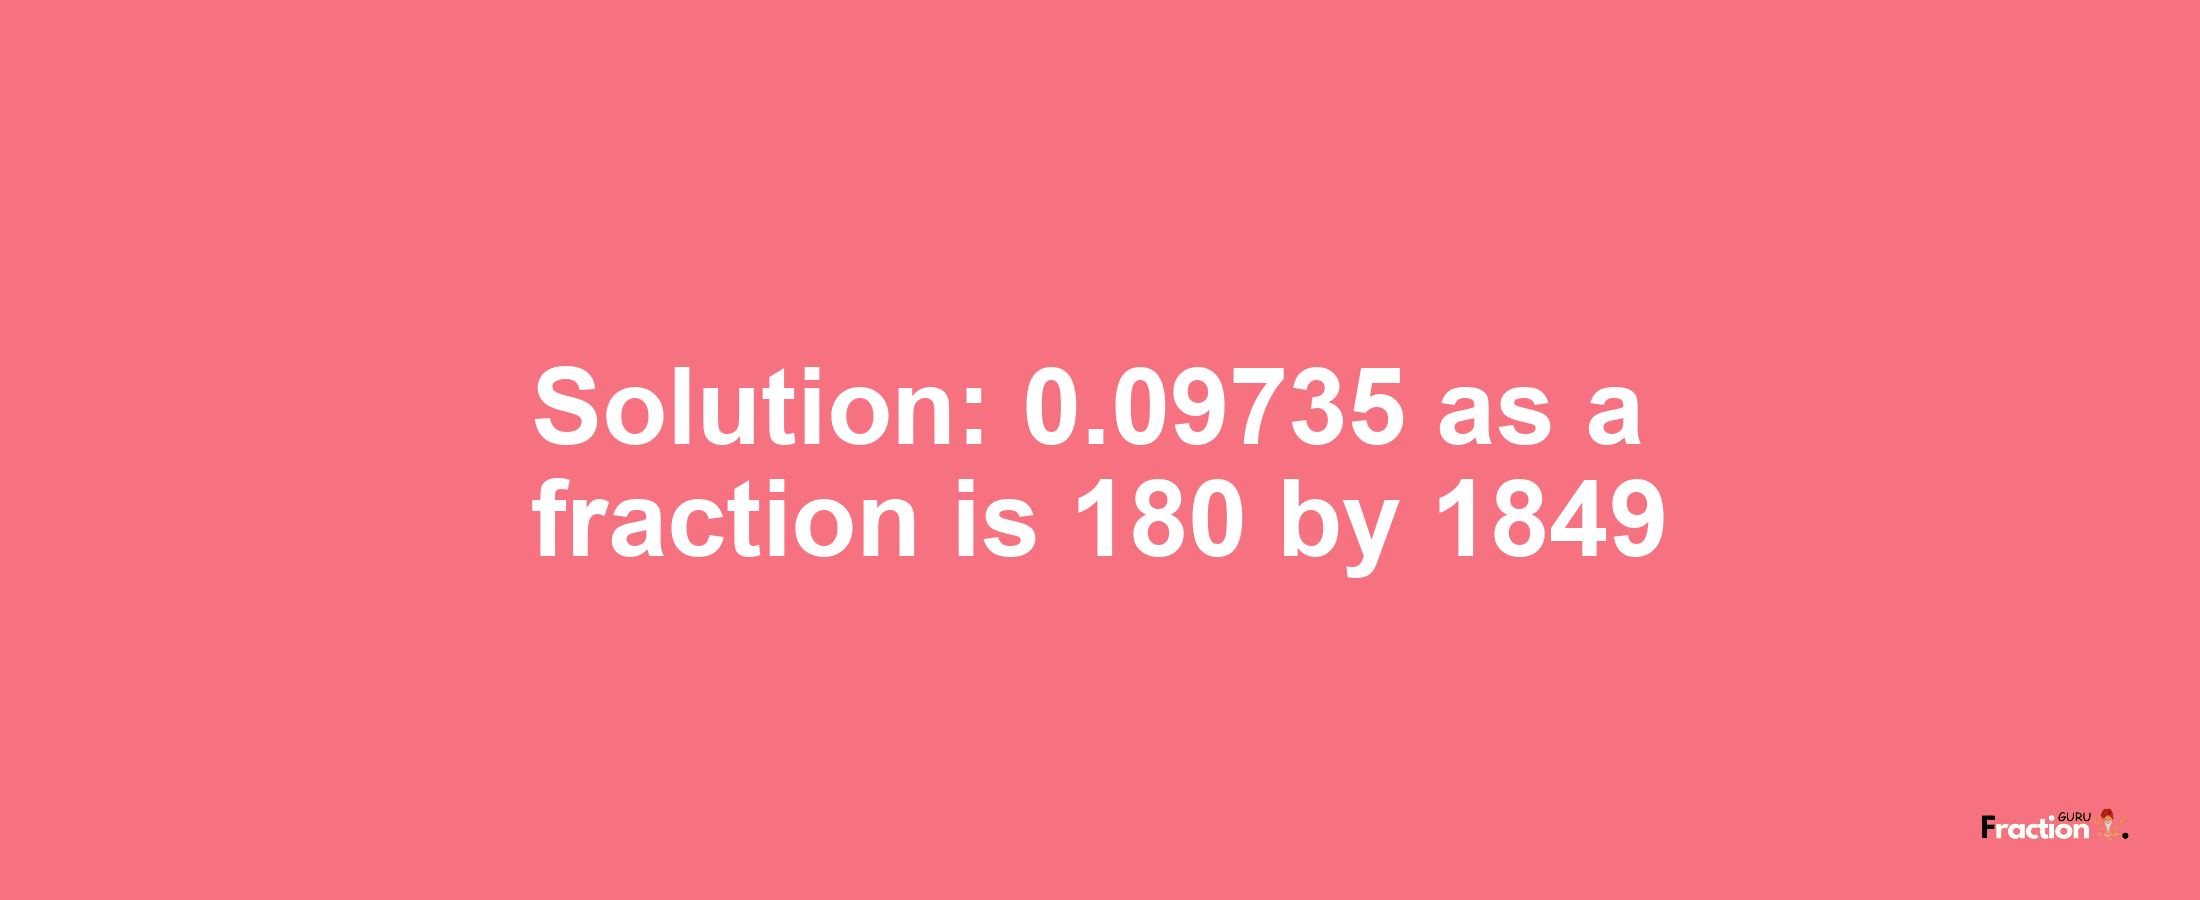 Solution:0.09735 as a fraction is 180/1849